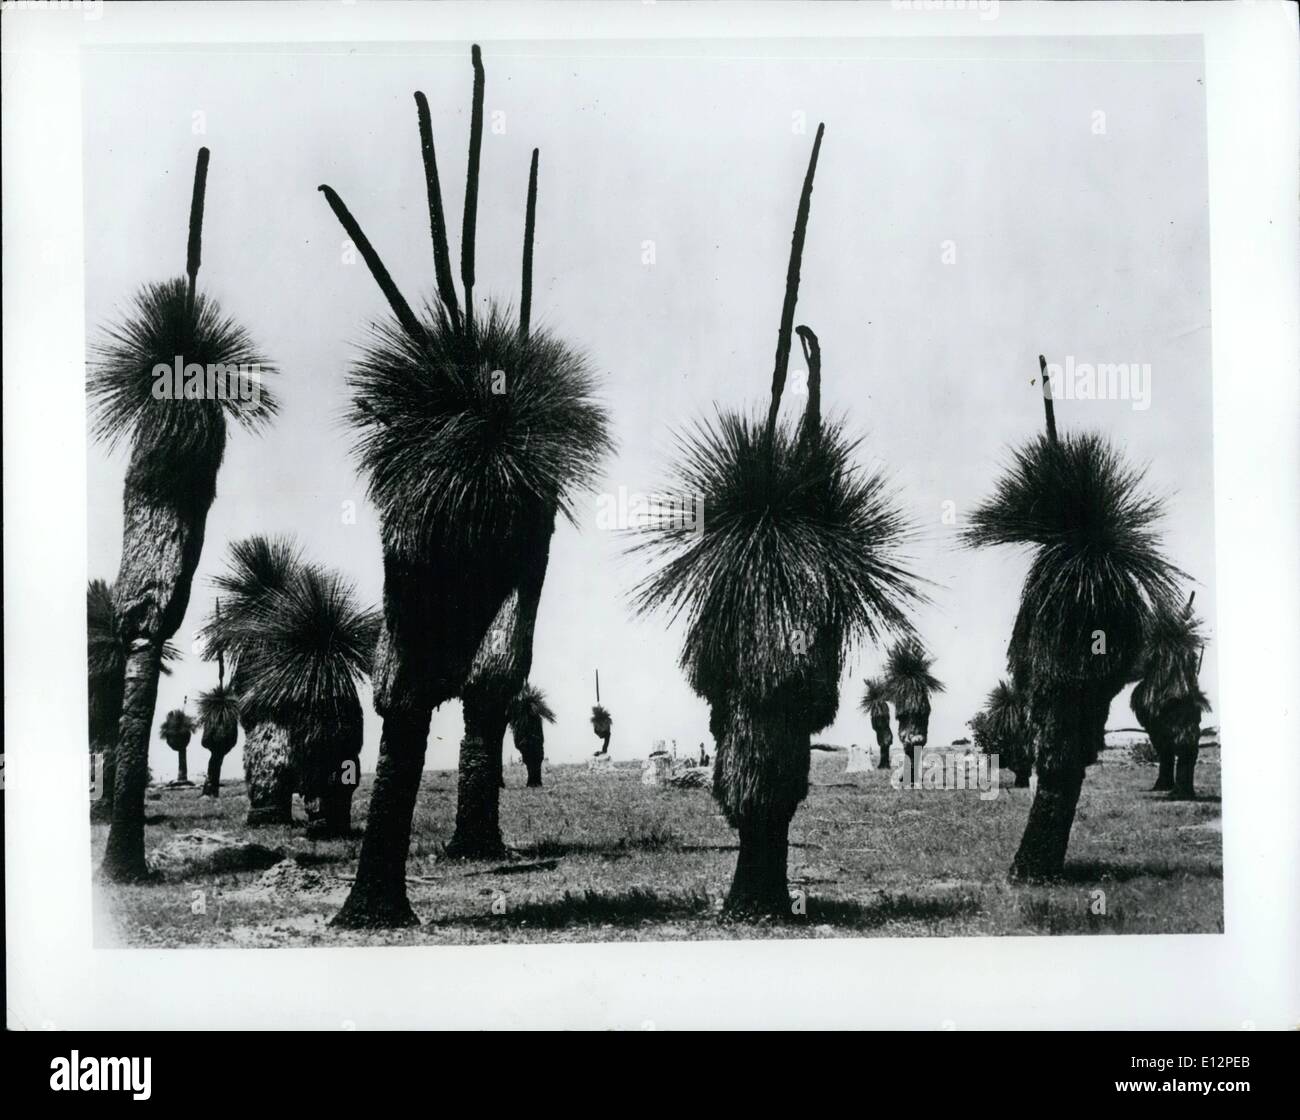 Feb. 24, 2012 - The Odd Ones: These perculiar growths in Western Australia are known as Grass Trees. They are just one of the many oddities to be found in that interesting and vast country. Stock Photo